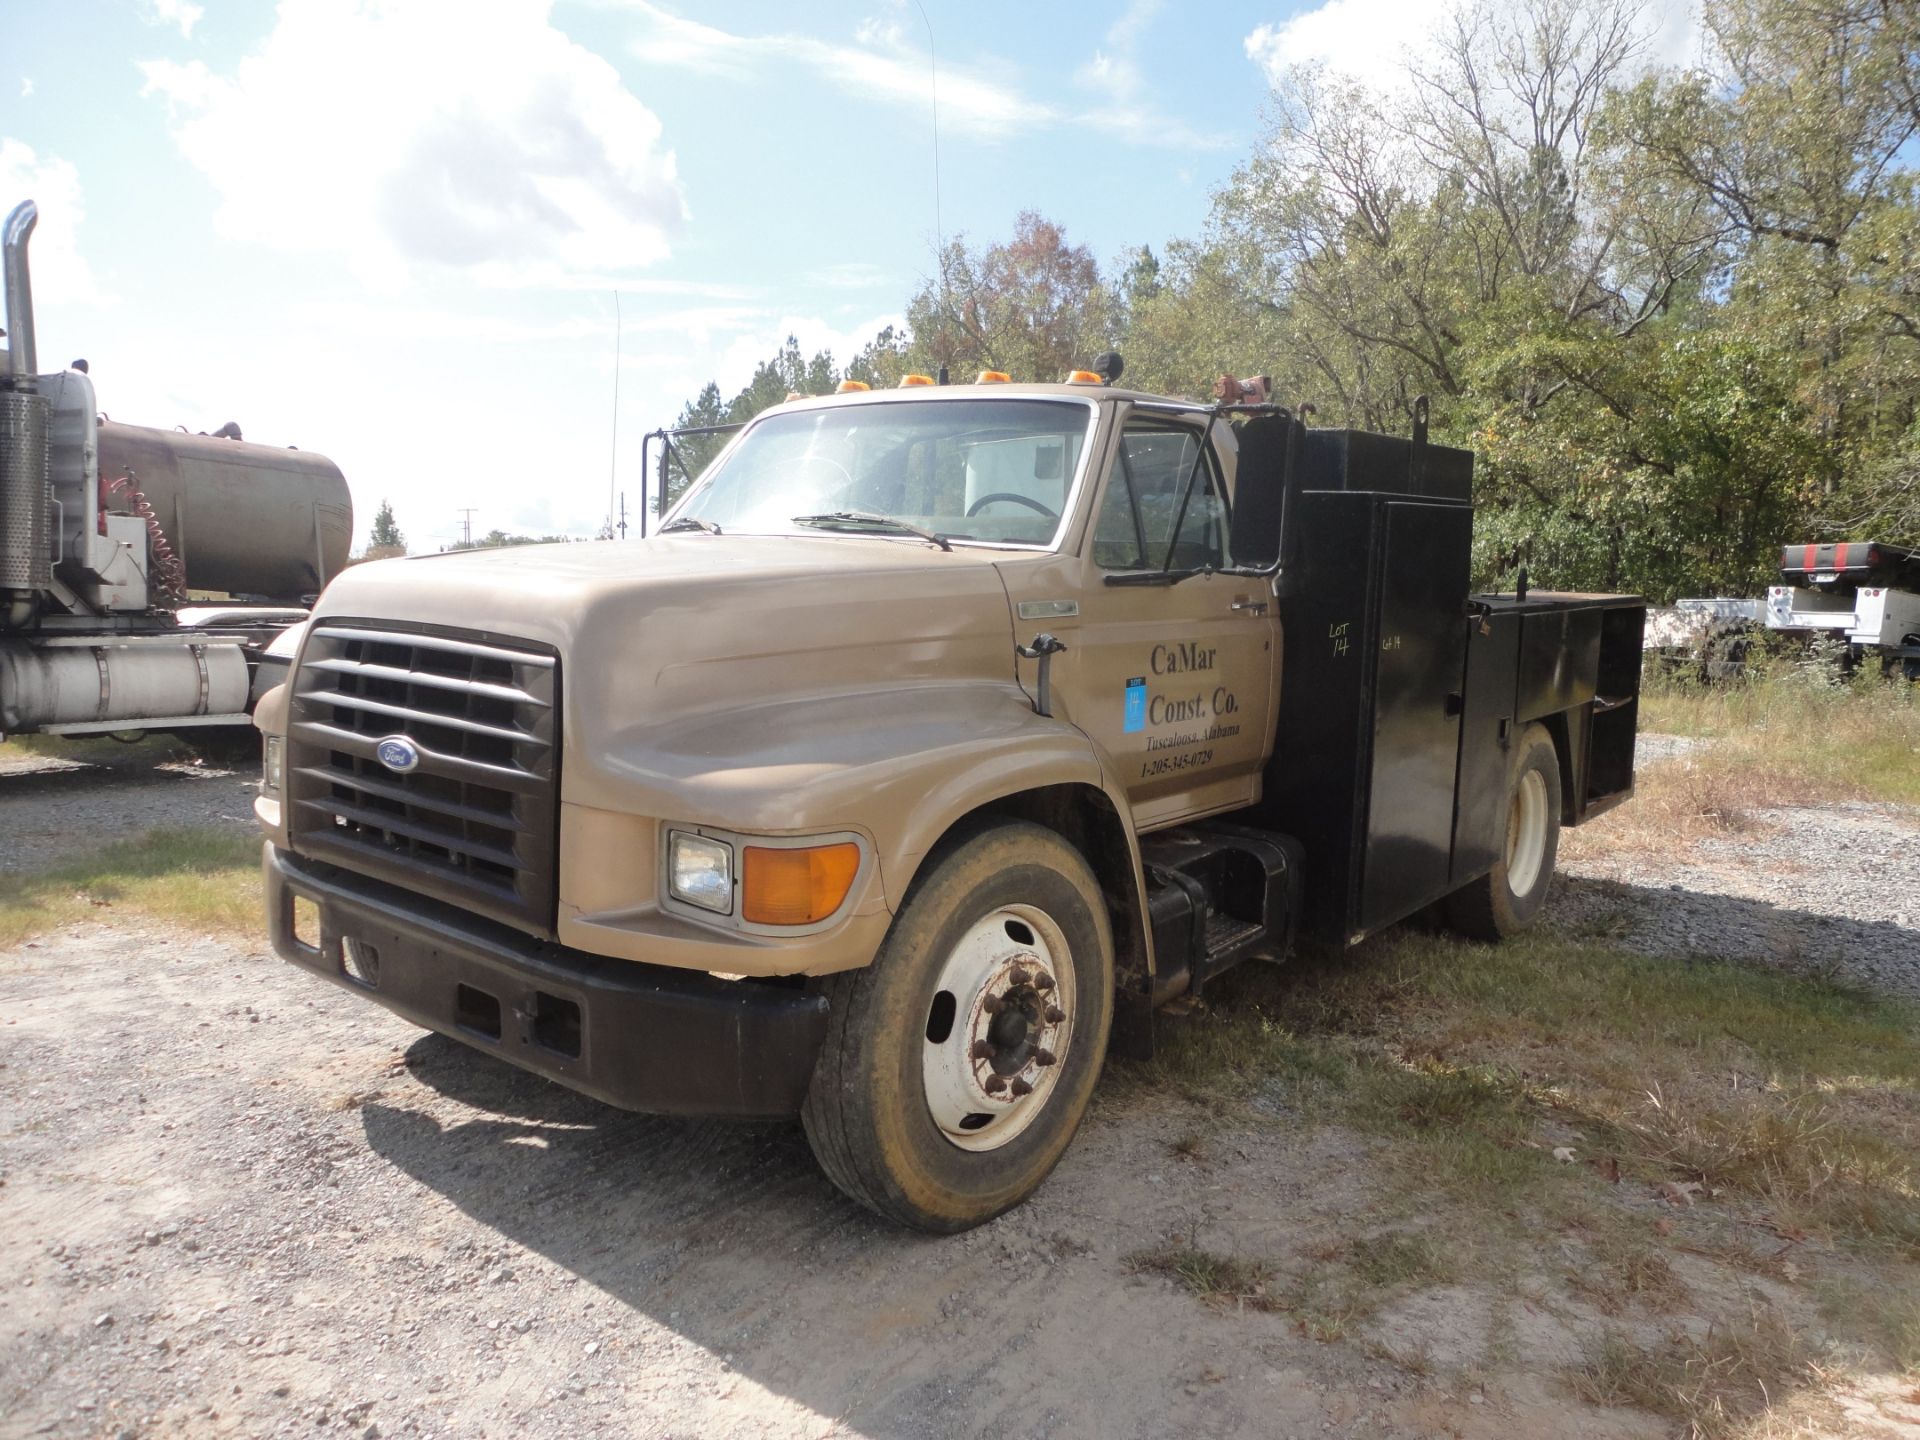 1995 FORD F-700 GAS POWERED 2-SPEED TRANSMISSION, V-8 MOTOR, PTO SYSTEM DUALLY SERVICE TRUCK;